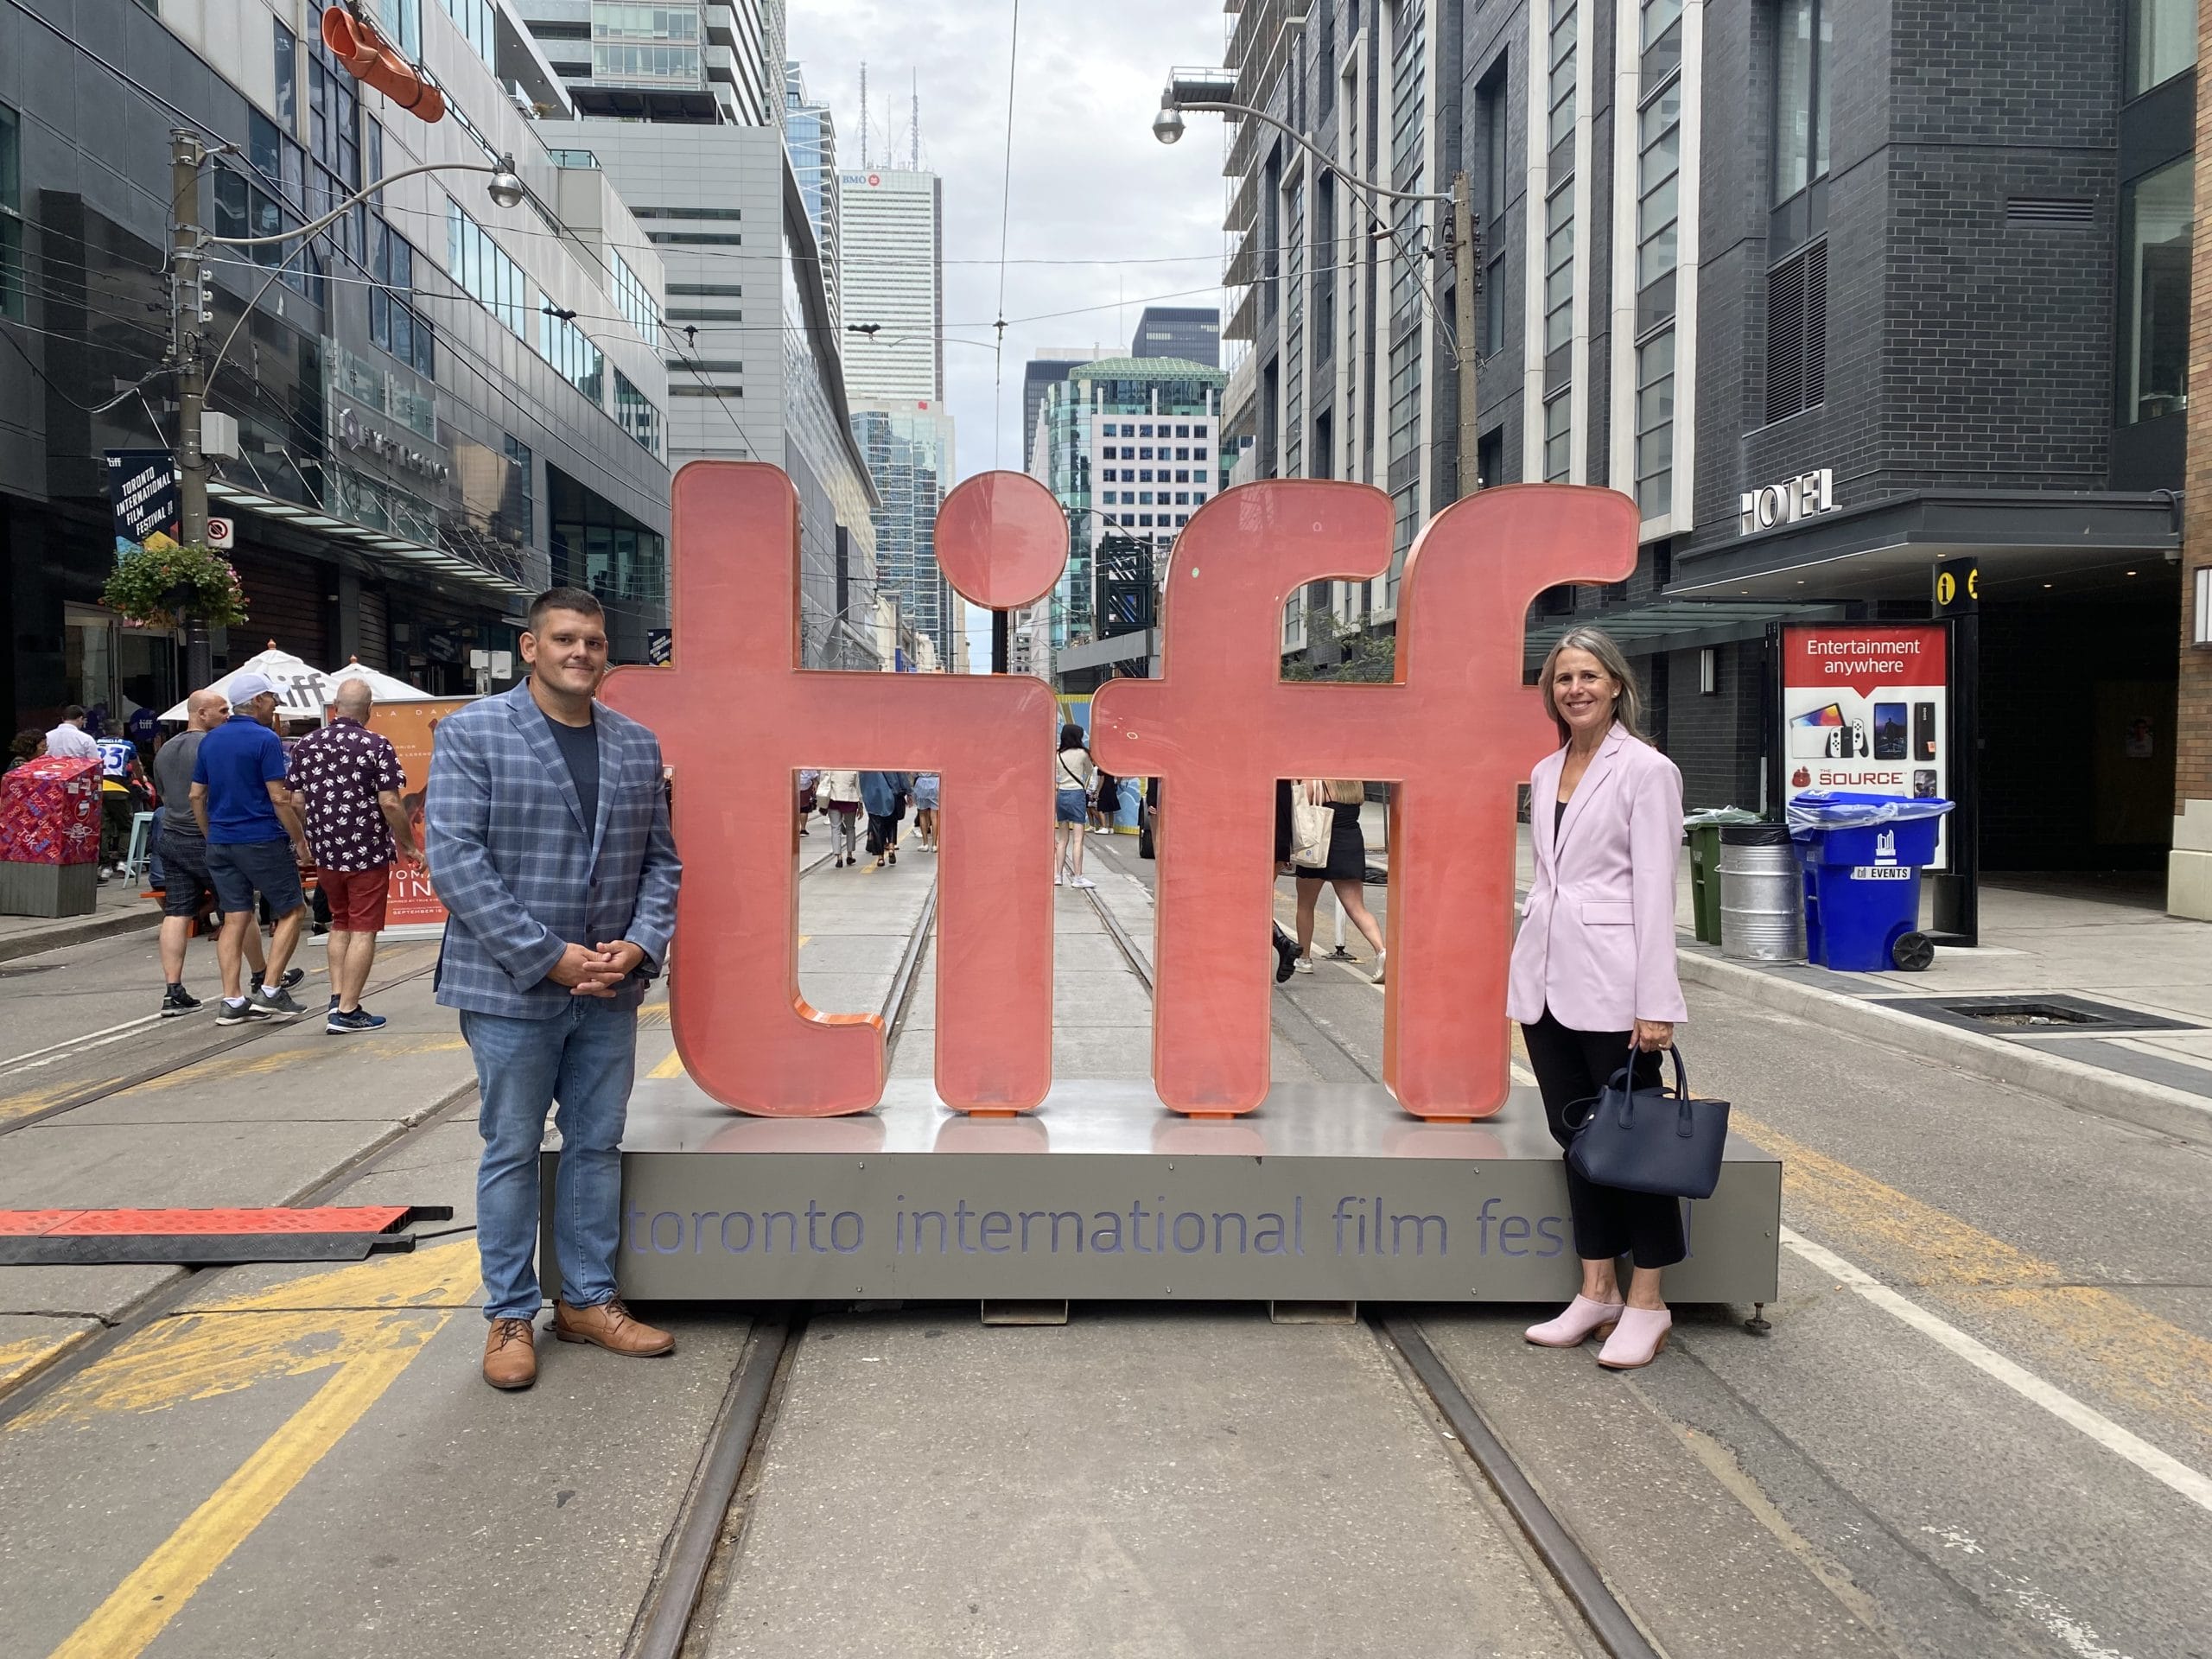 A man and a woman posing next to the large red "tiff" letters at the toronto international film festival on a city street.